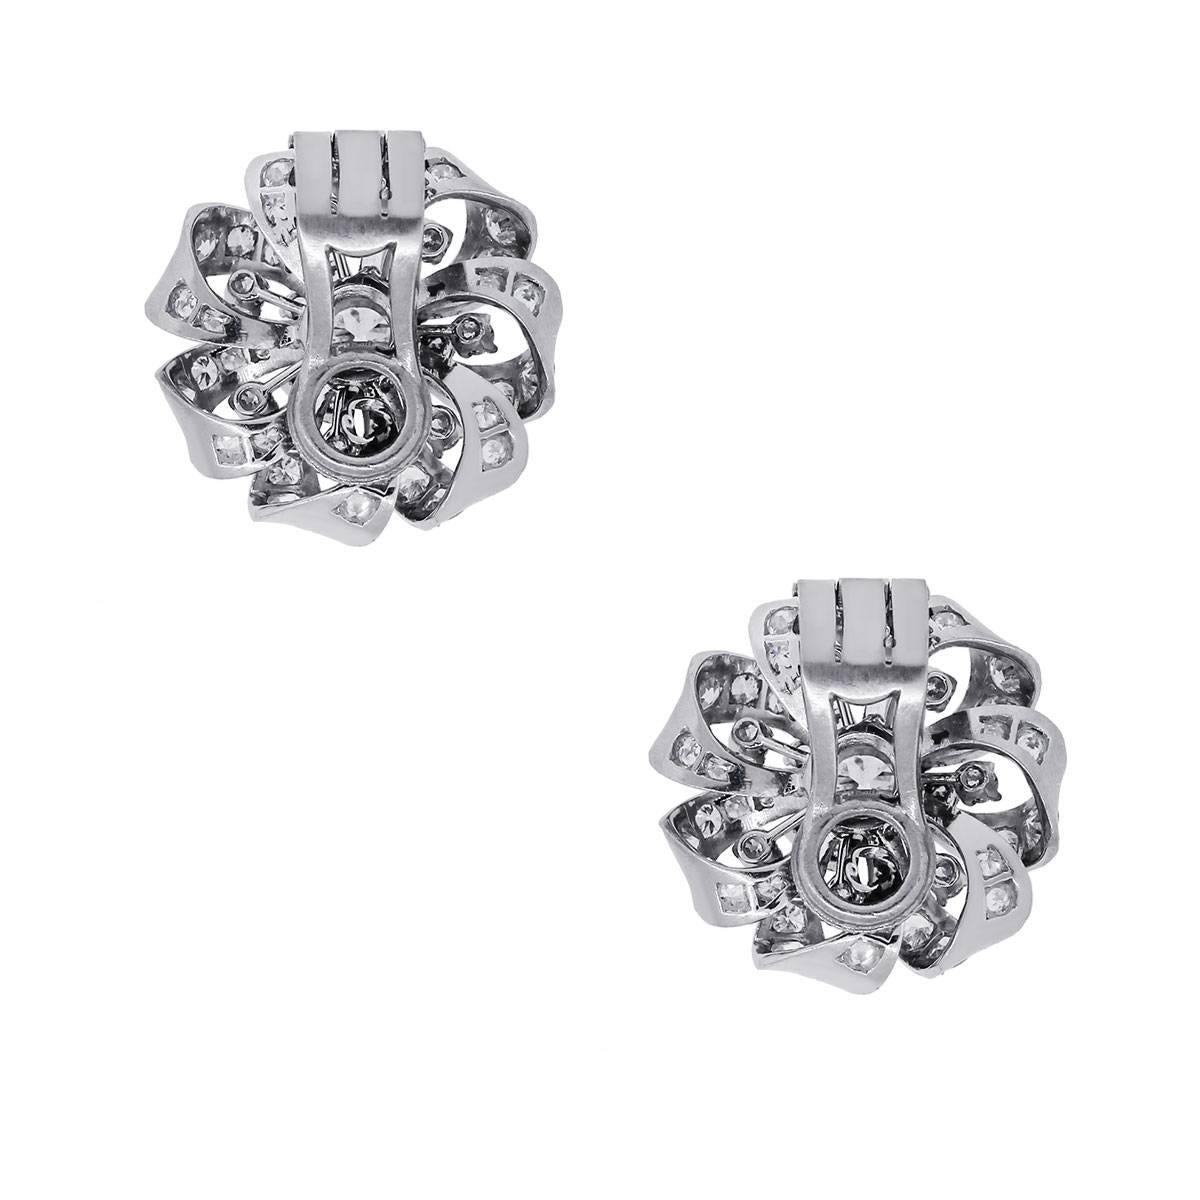 Material: Platinum
Style: diamond earrings
Center Diamond Details: 1.03ct old European cut diamond J in color and SI1 in clarity. GIA Certified (2185025024)
1.01ct old European cut diamond L in color and SI1 in clarity. GIA Certified